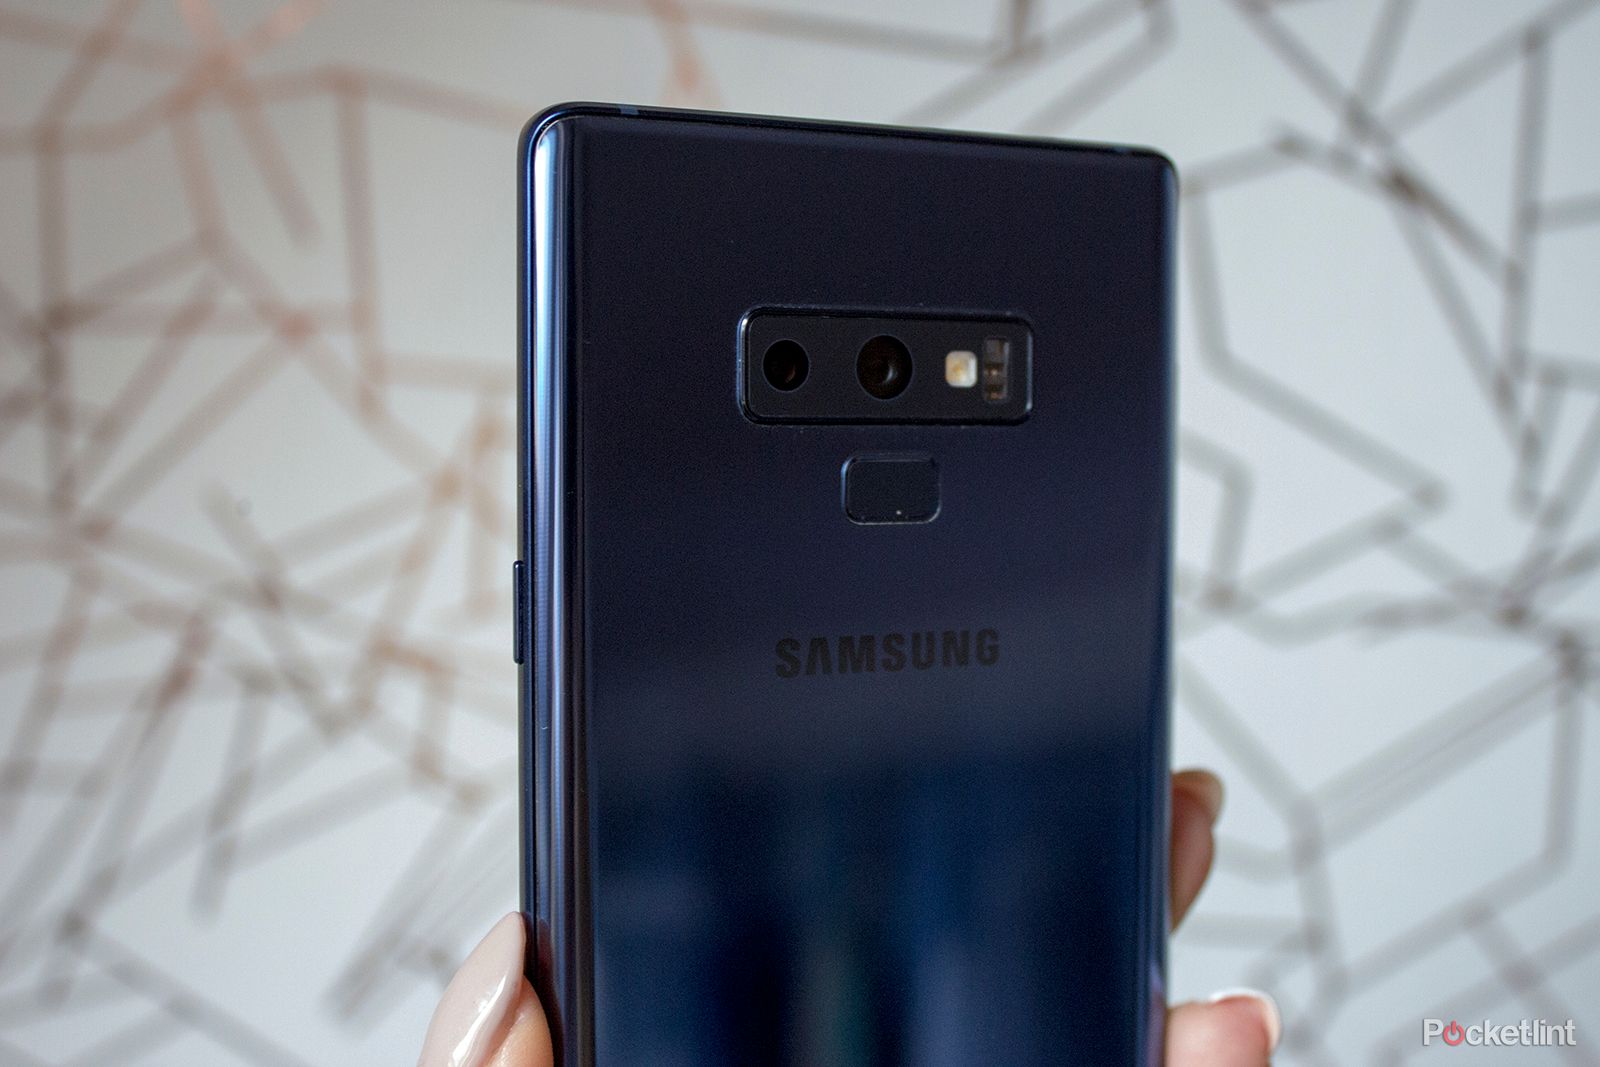 Larger Samsung Galaxy Note 10 could get quad camera image 1